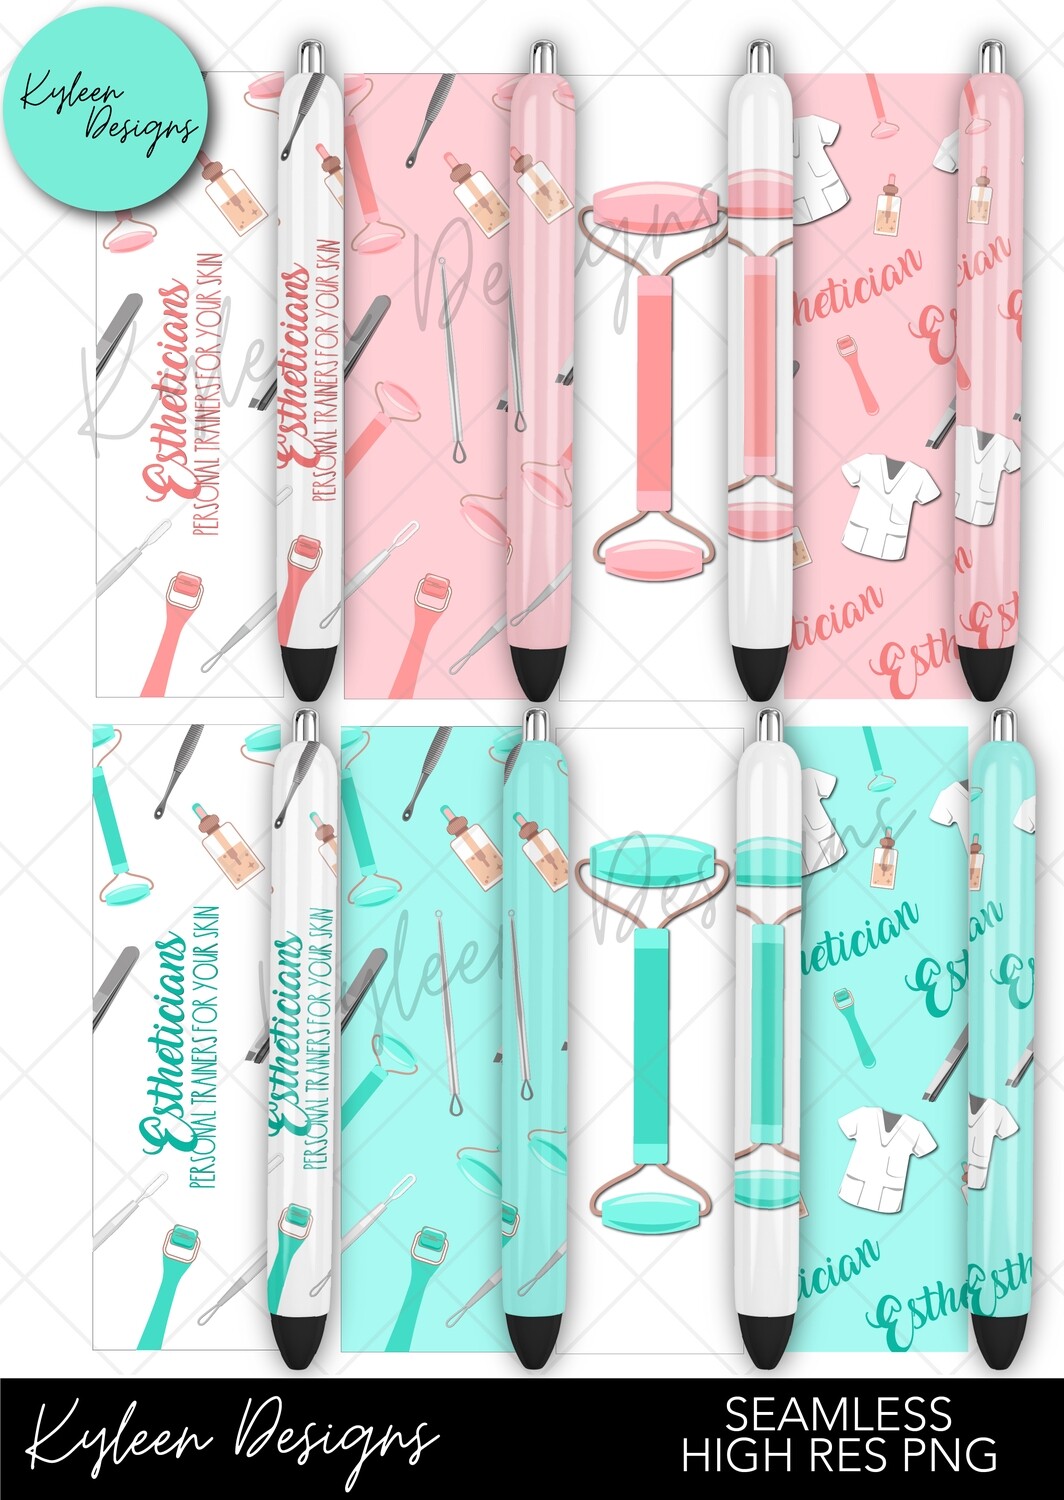 Seamless aesthetician pen wrappers™  for waterslide High Res PNG file